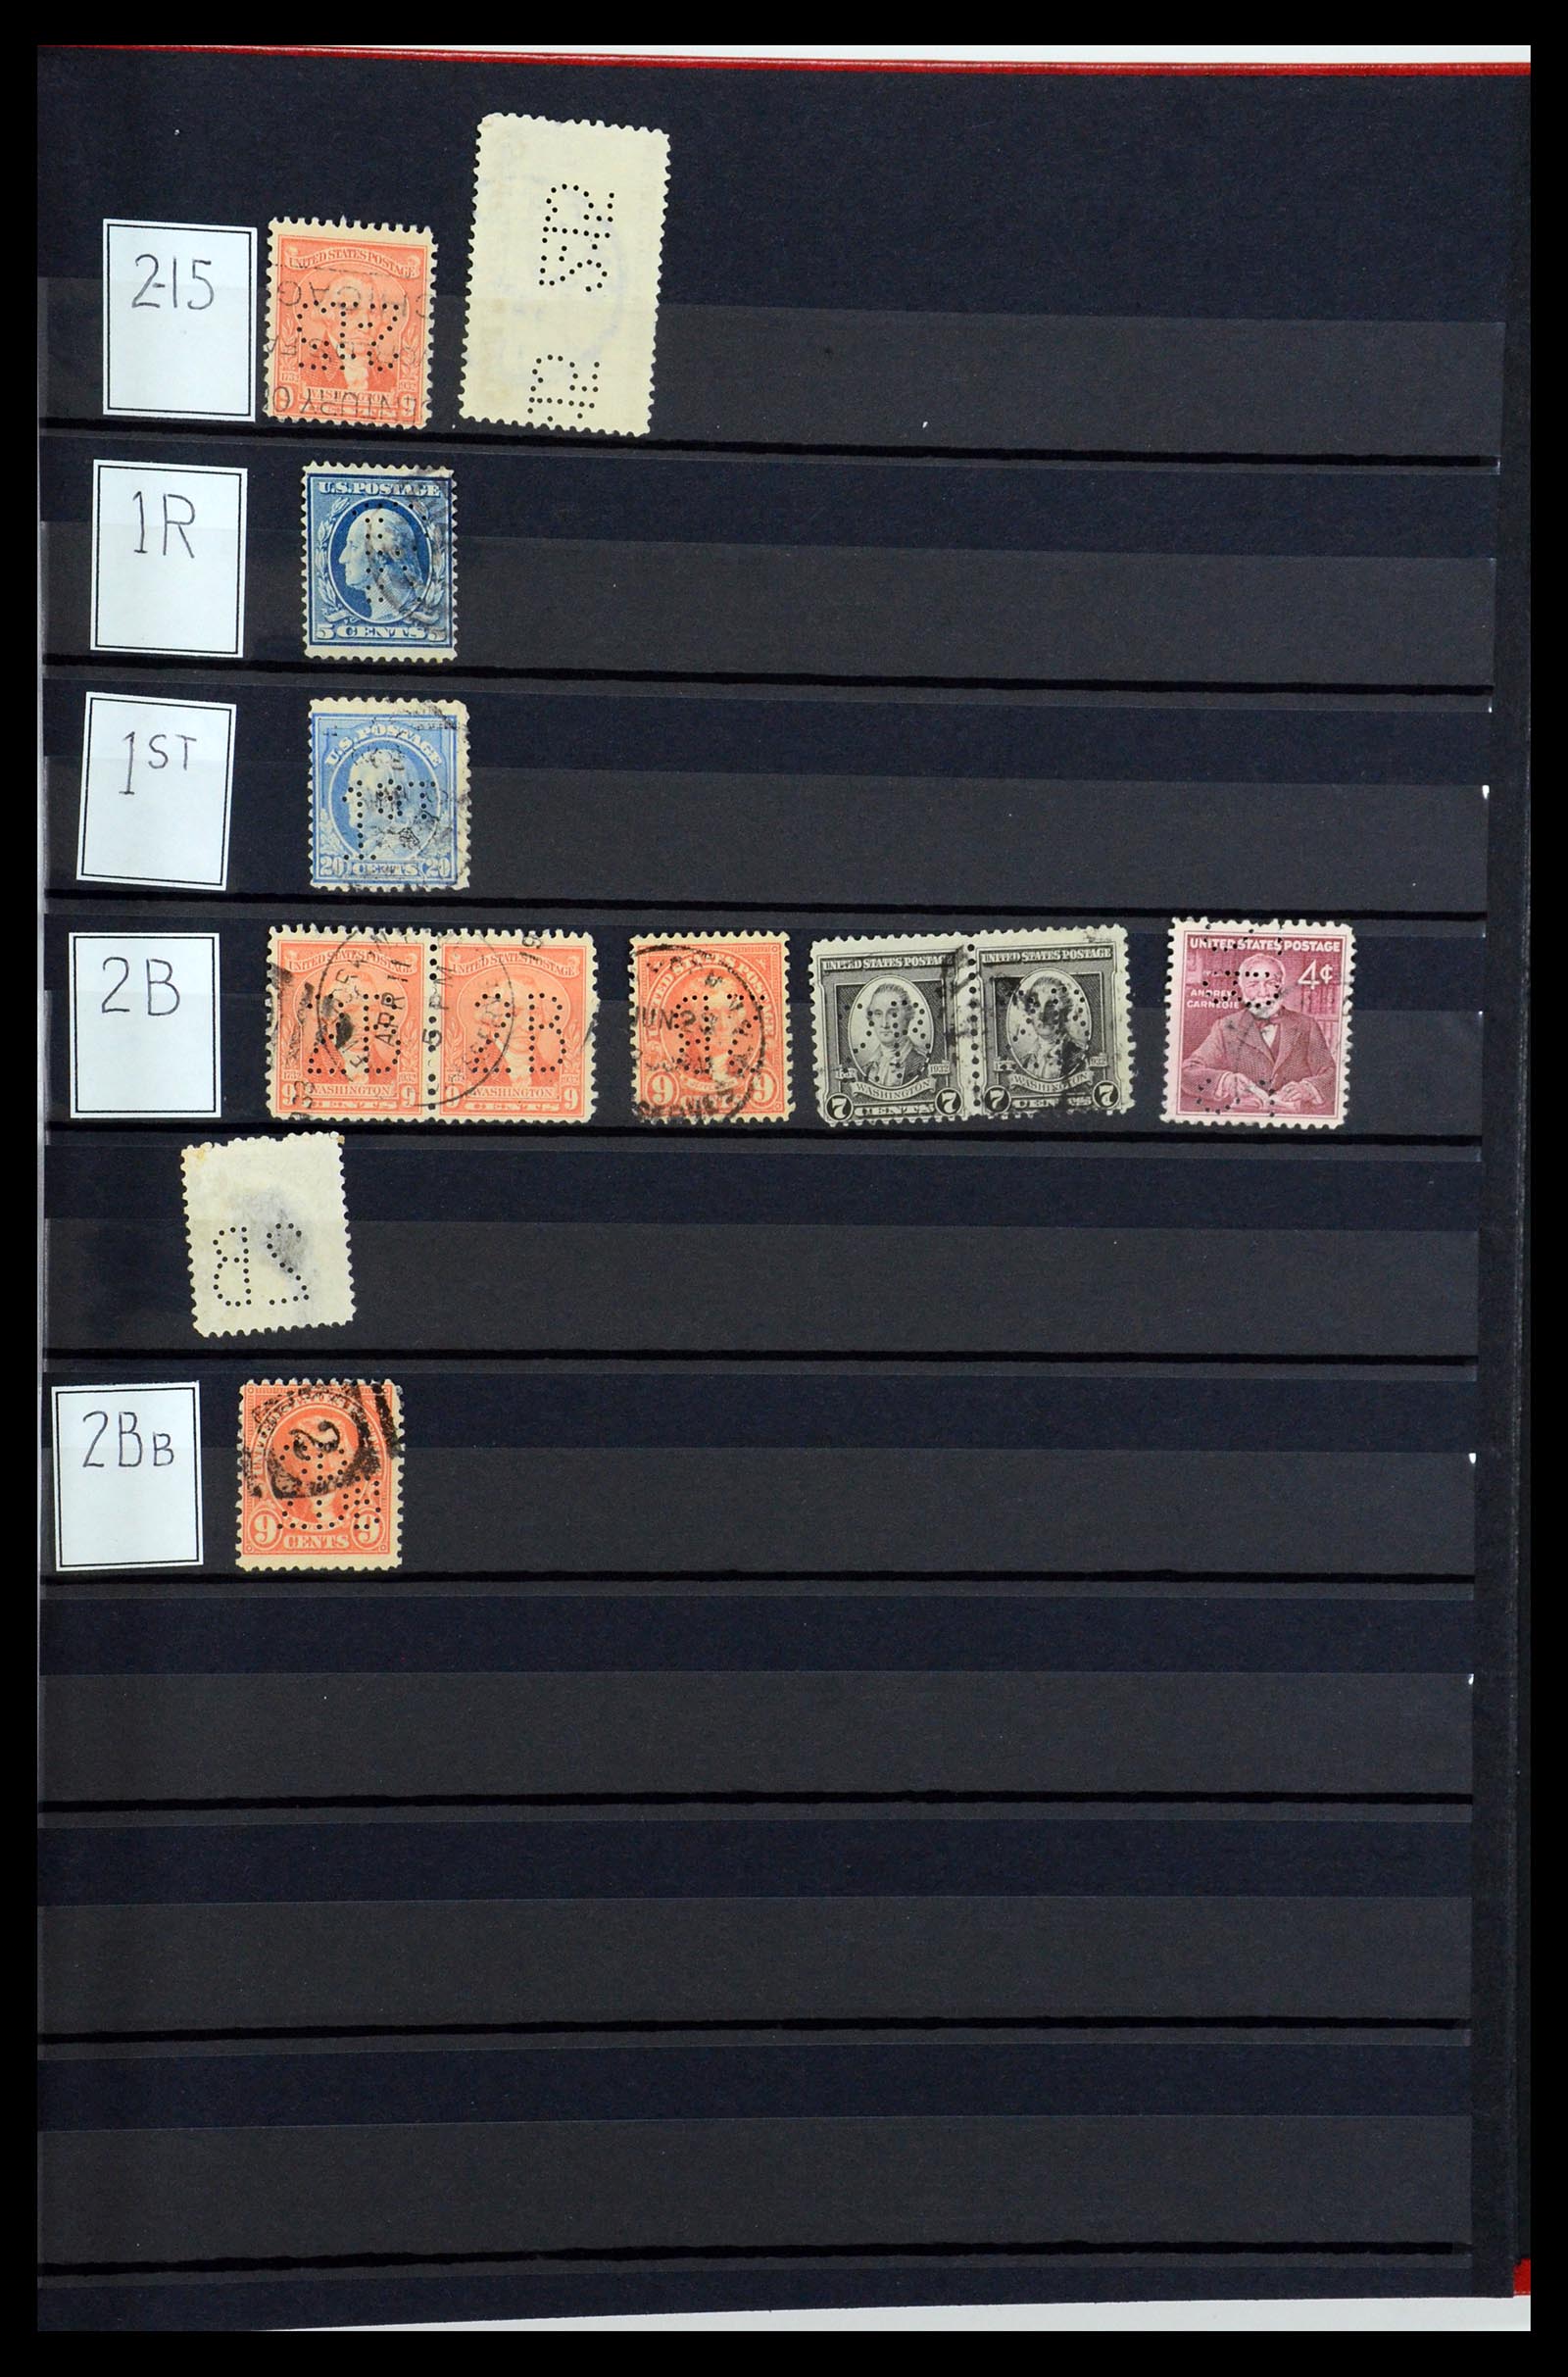 36388 167 - Stamp collection 36388 USA perfins.